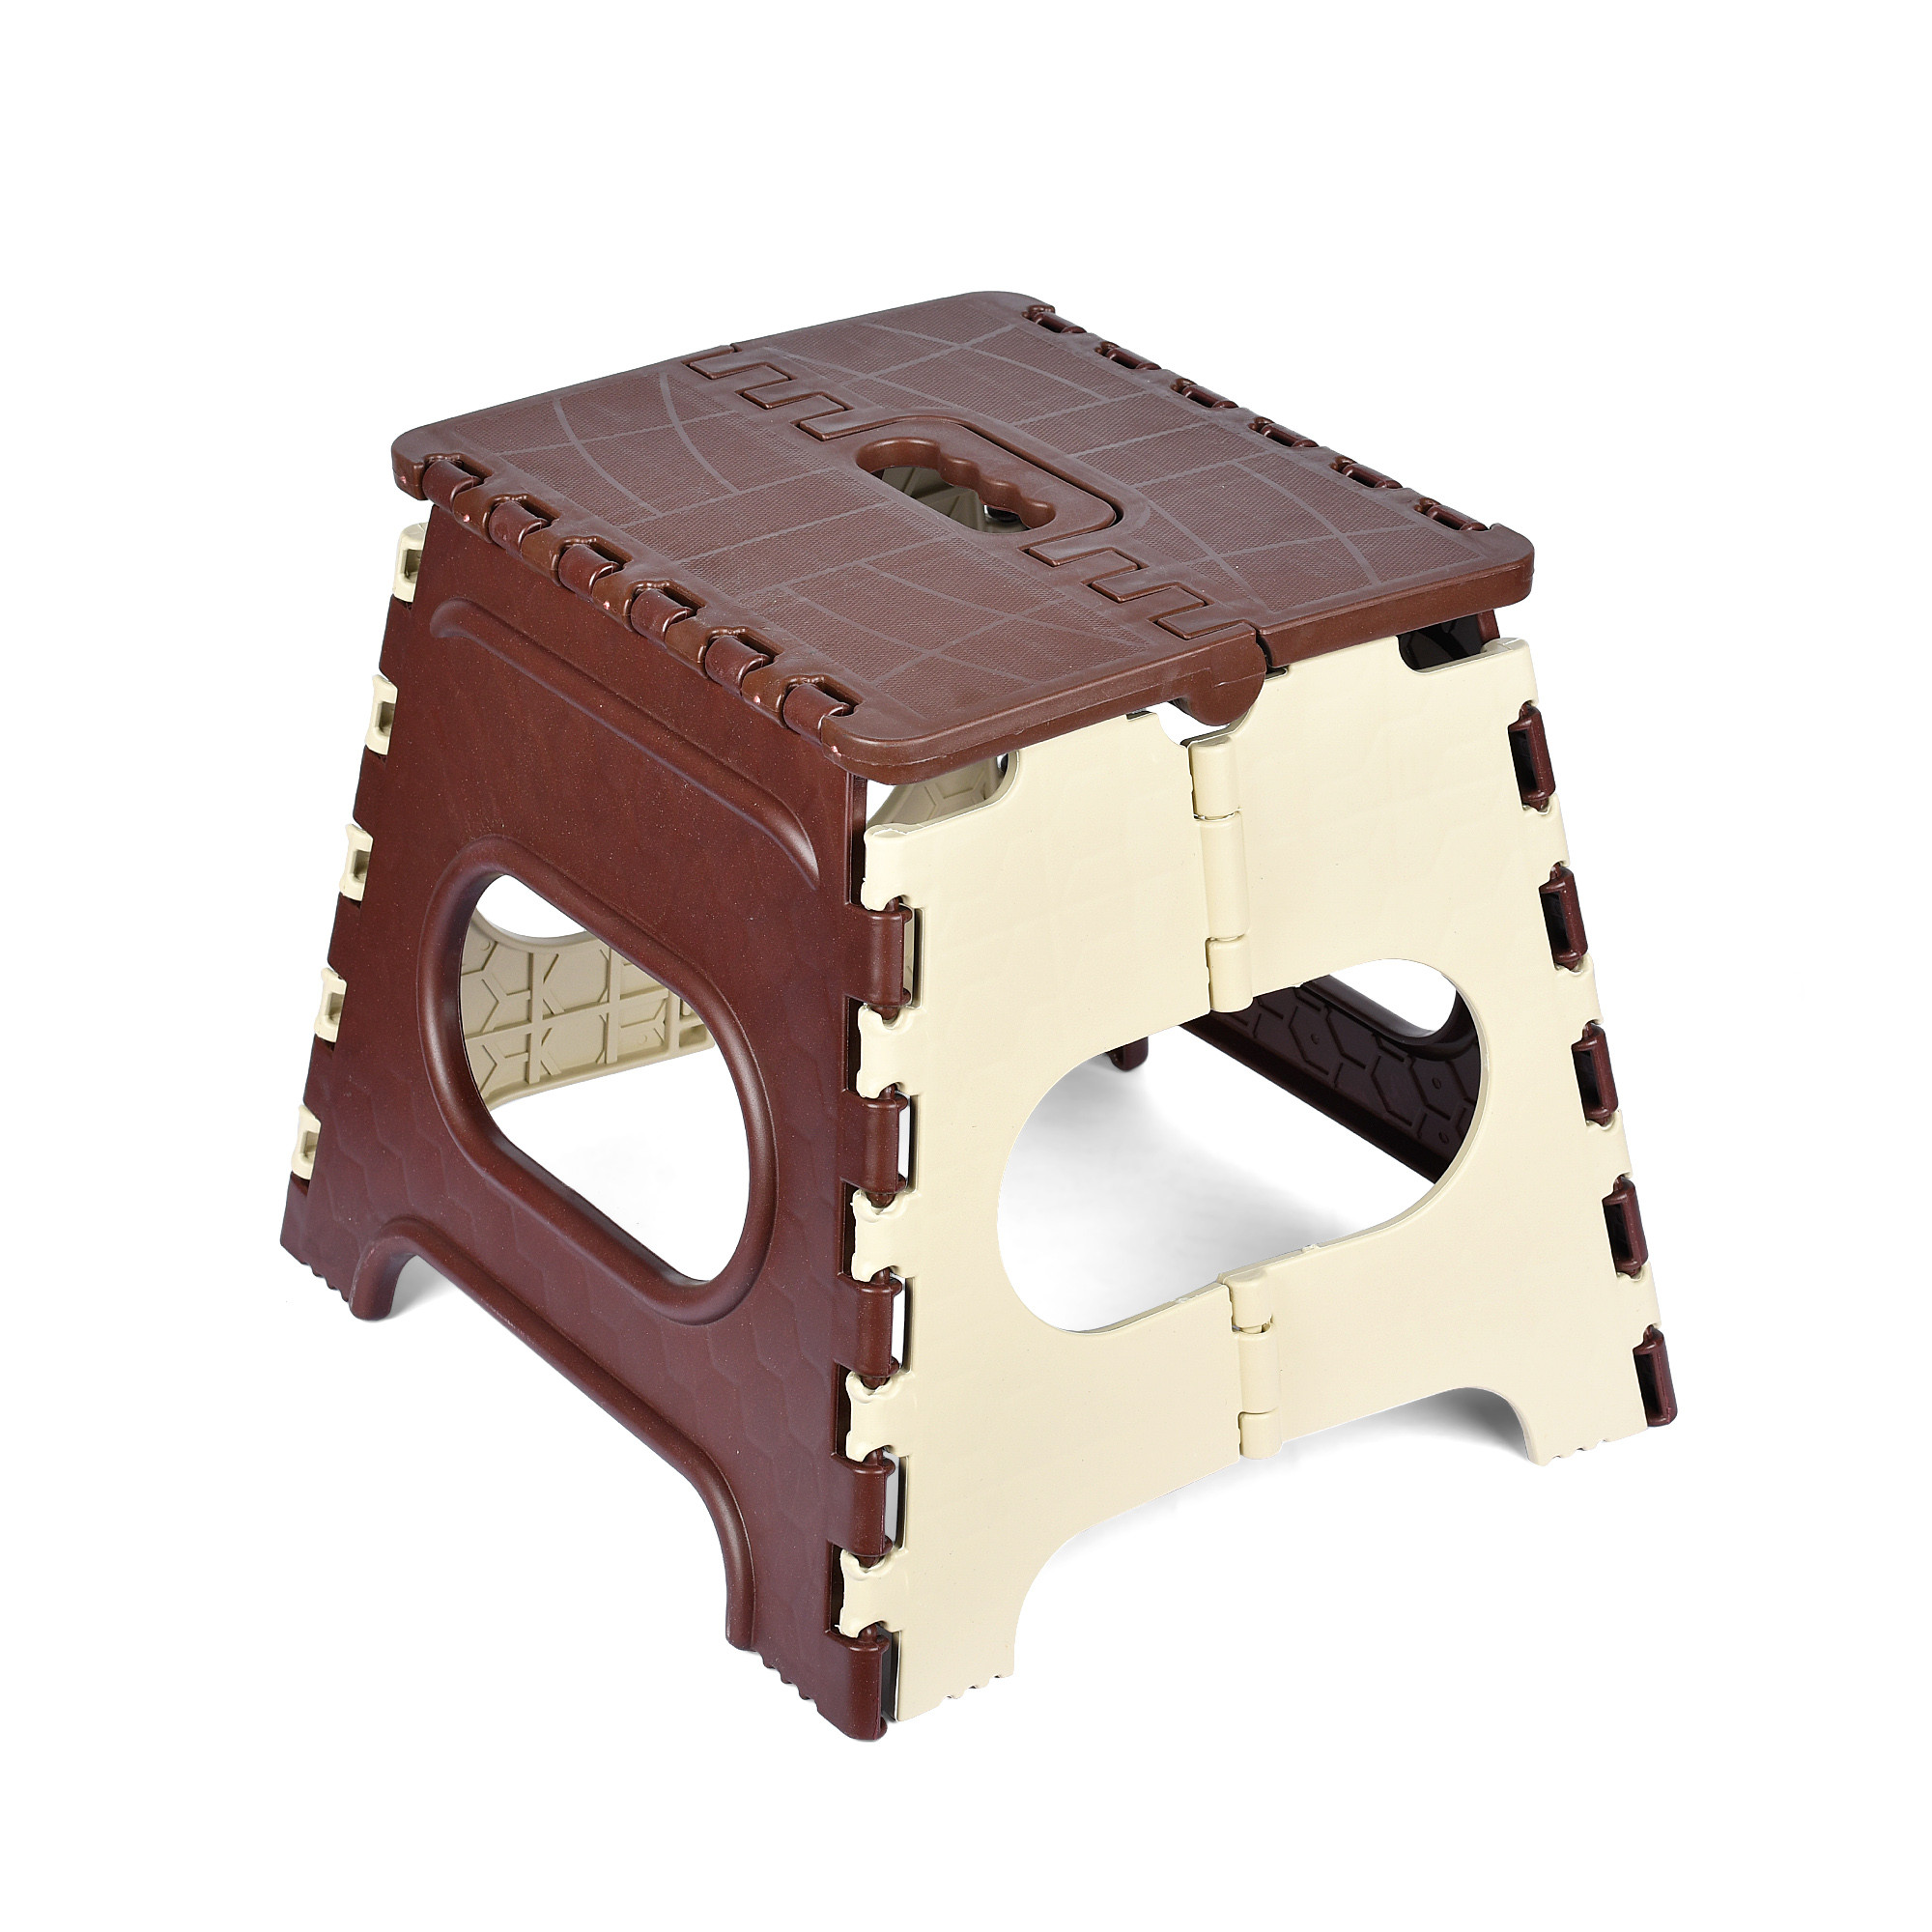 Kuber Industries Stool | Foldable Stool | Collapsible Camping Chair | Stool for Outdoor-Fishing-Hiking-Gardening-Travel | Portable Stool | Multipurpose Sitting Stool | Small | Cream & Brown